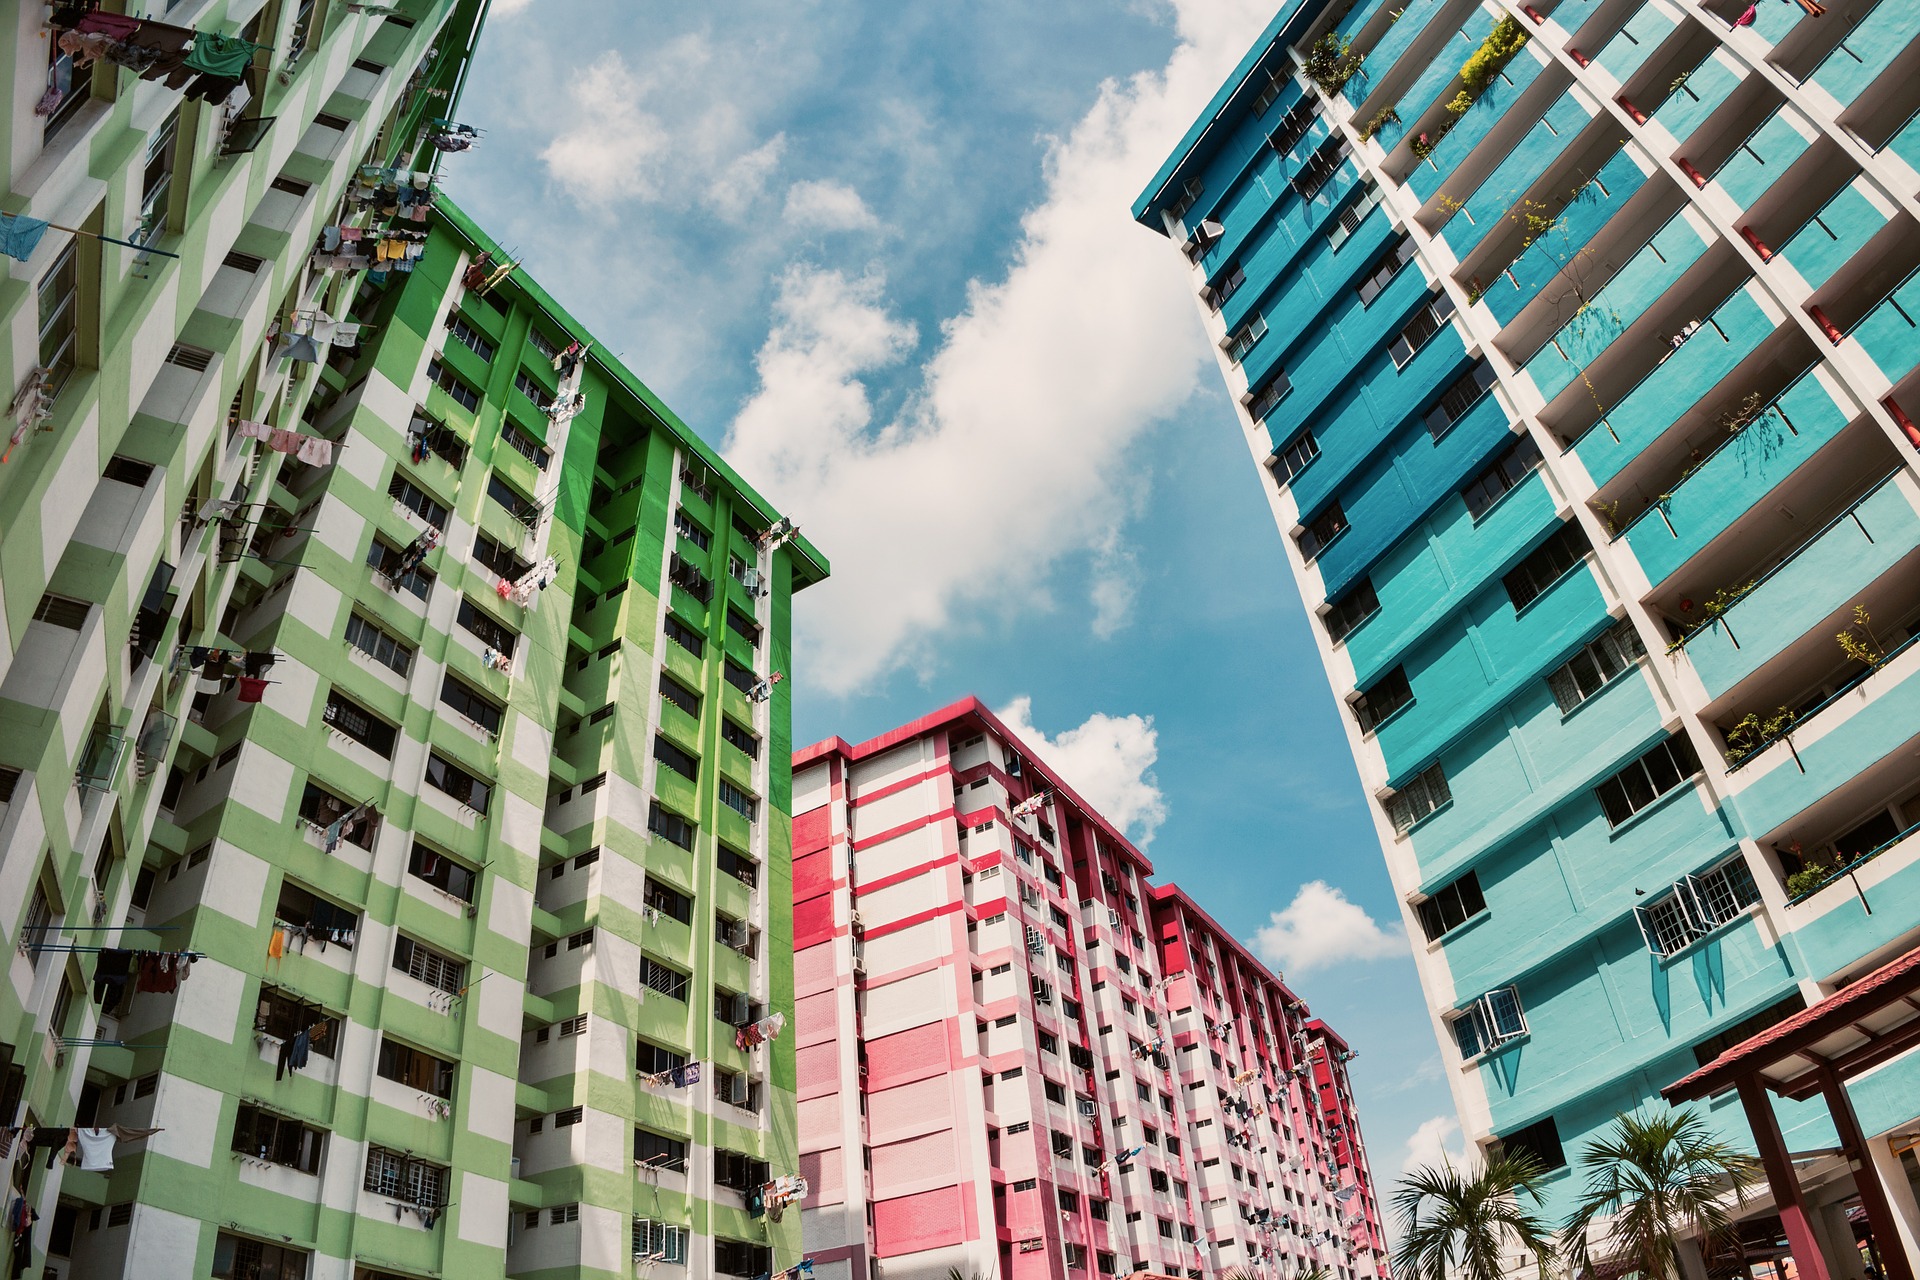 4 Things You Need to Know Before Renting Out Your HDB